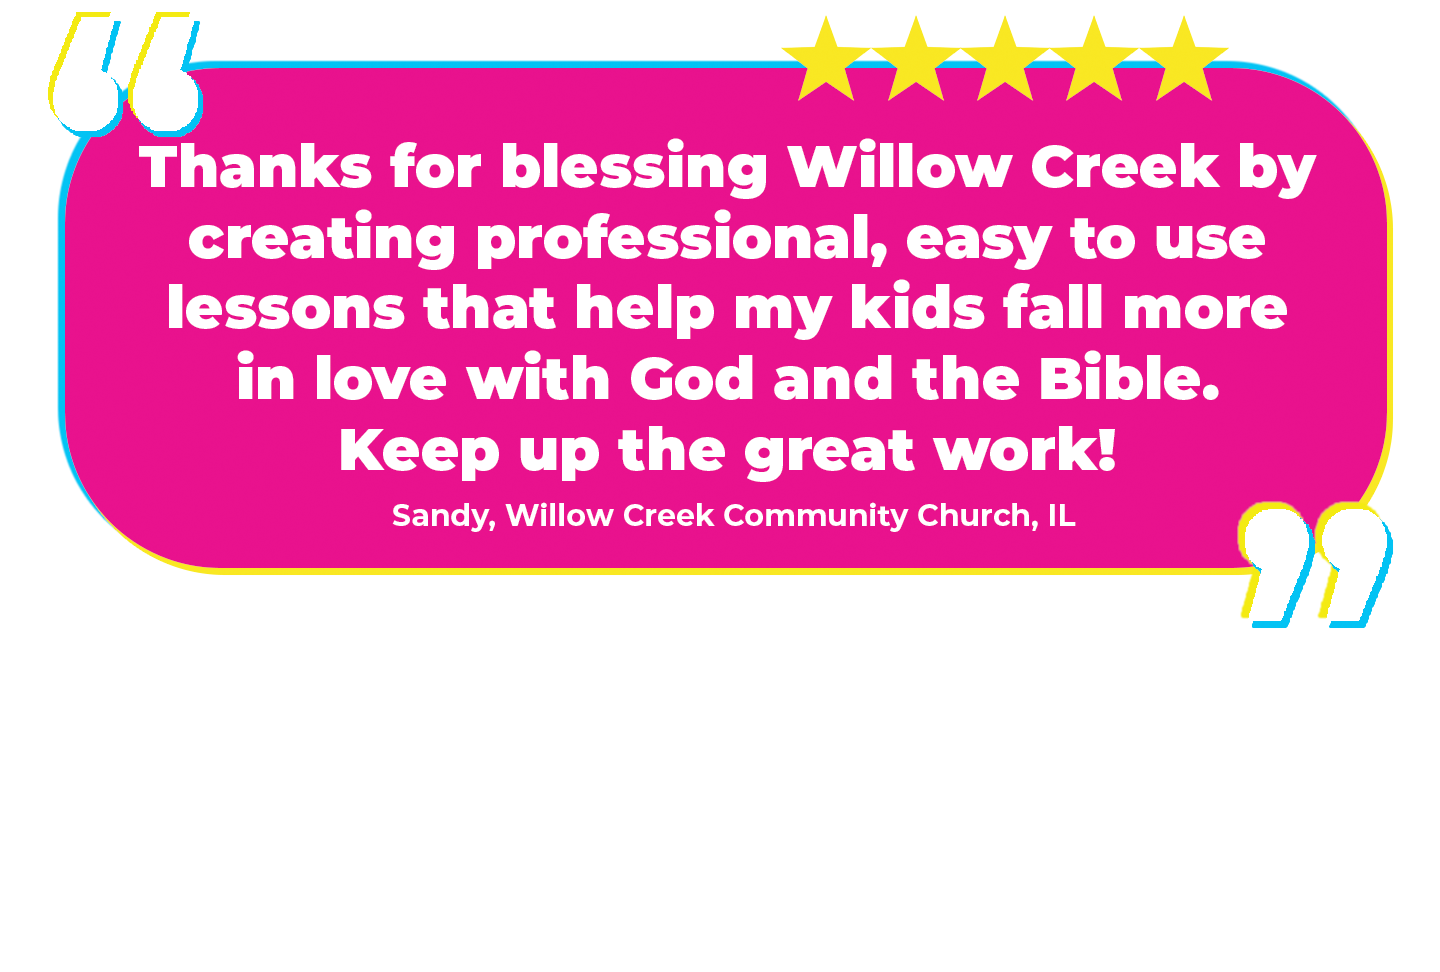 “Thanks for blessing Willow Creek by creating professional, easy to use lessons that help my kids fall more in love with God and the Bible. Keep up the great work!” Sandy, Willow Creek Community Church, IL Why we love it: The Promiseland team at Willow Creek has the HIGHEST programming expectations. We LOVE that they love GO! (Currently more than half of the Willow Creek campuses use GO!)